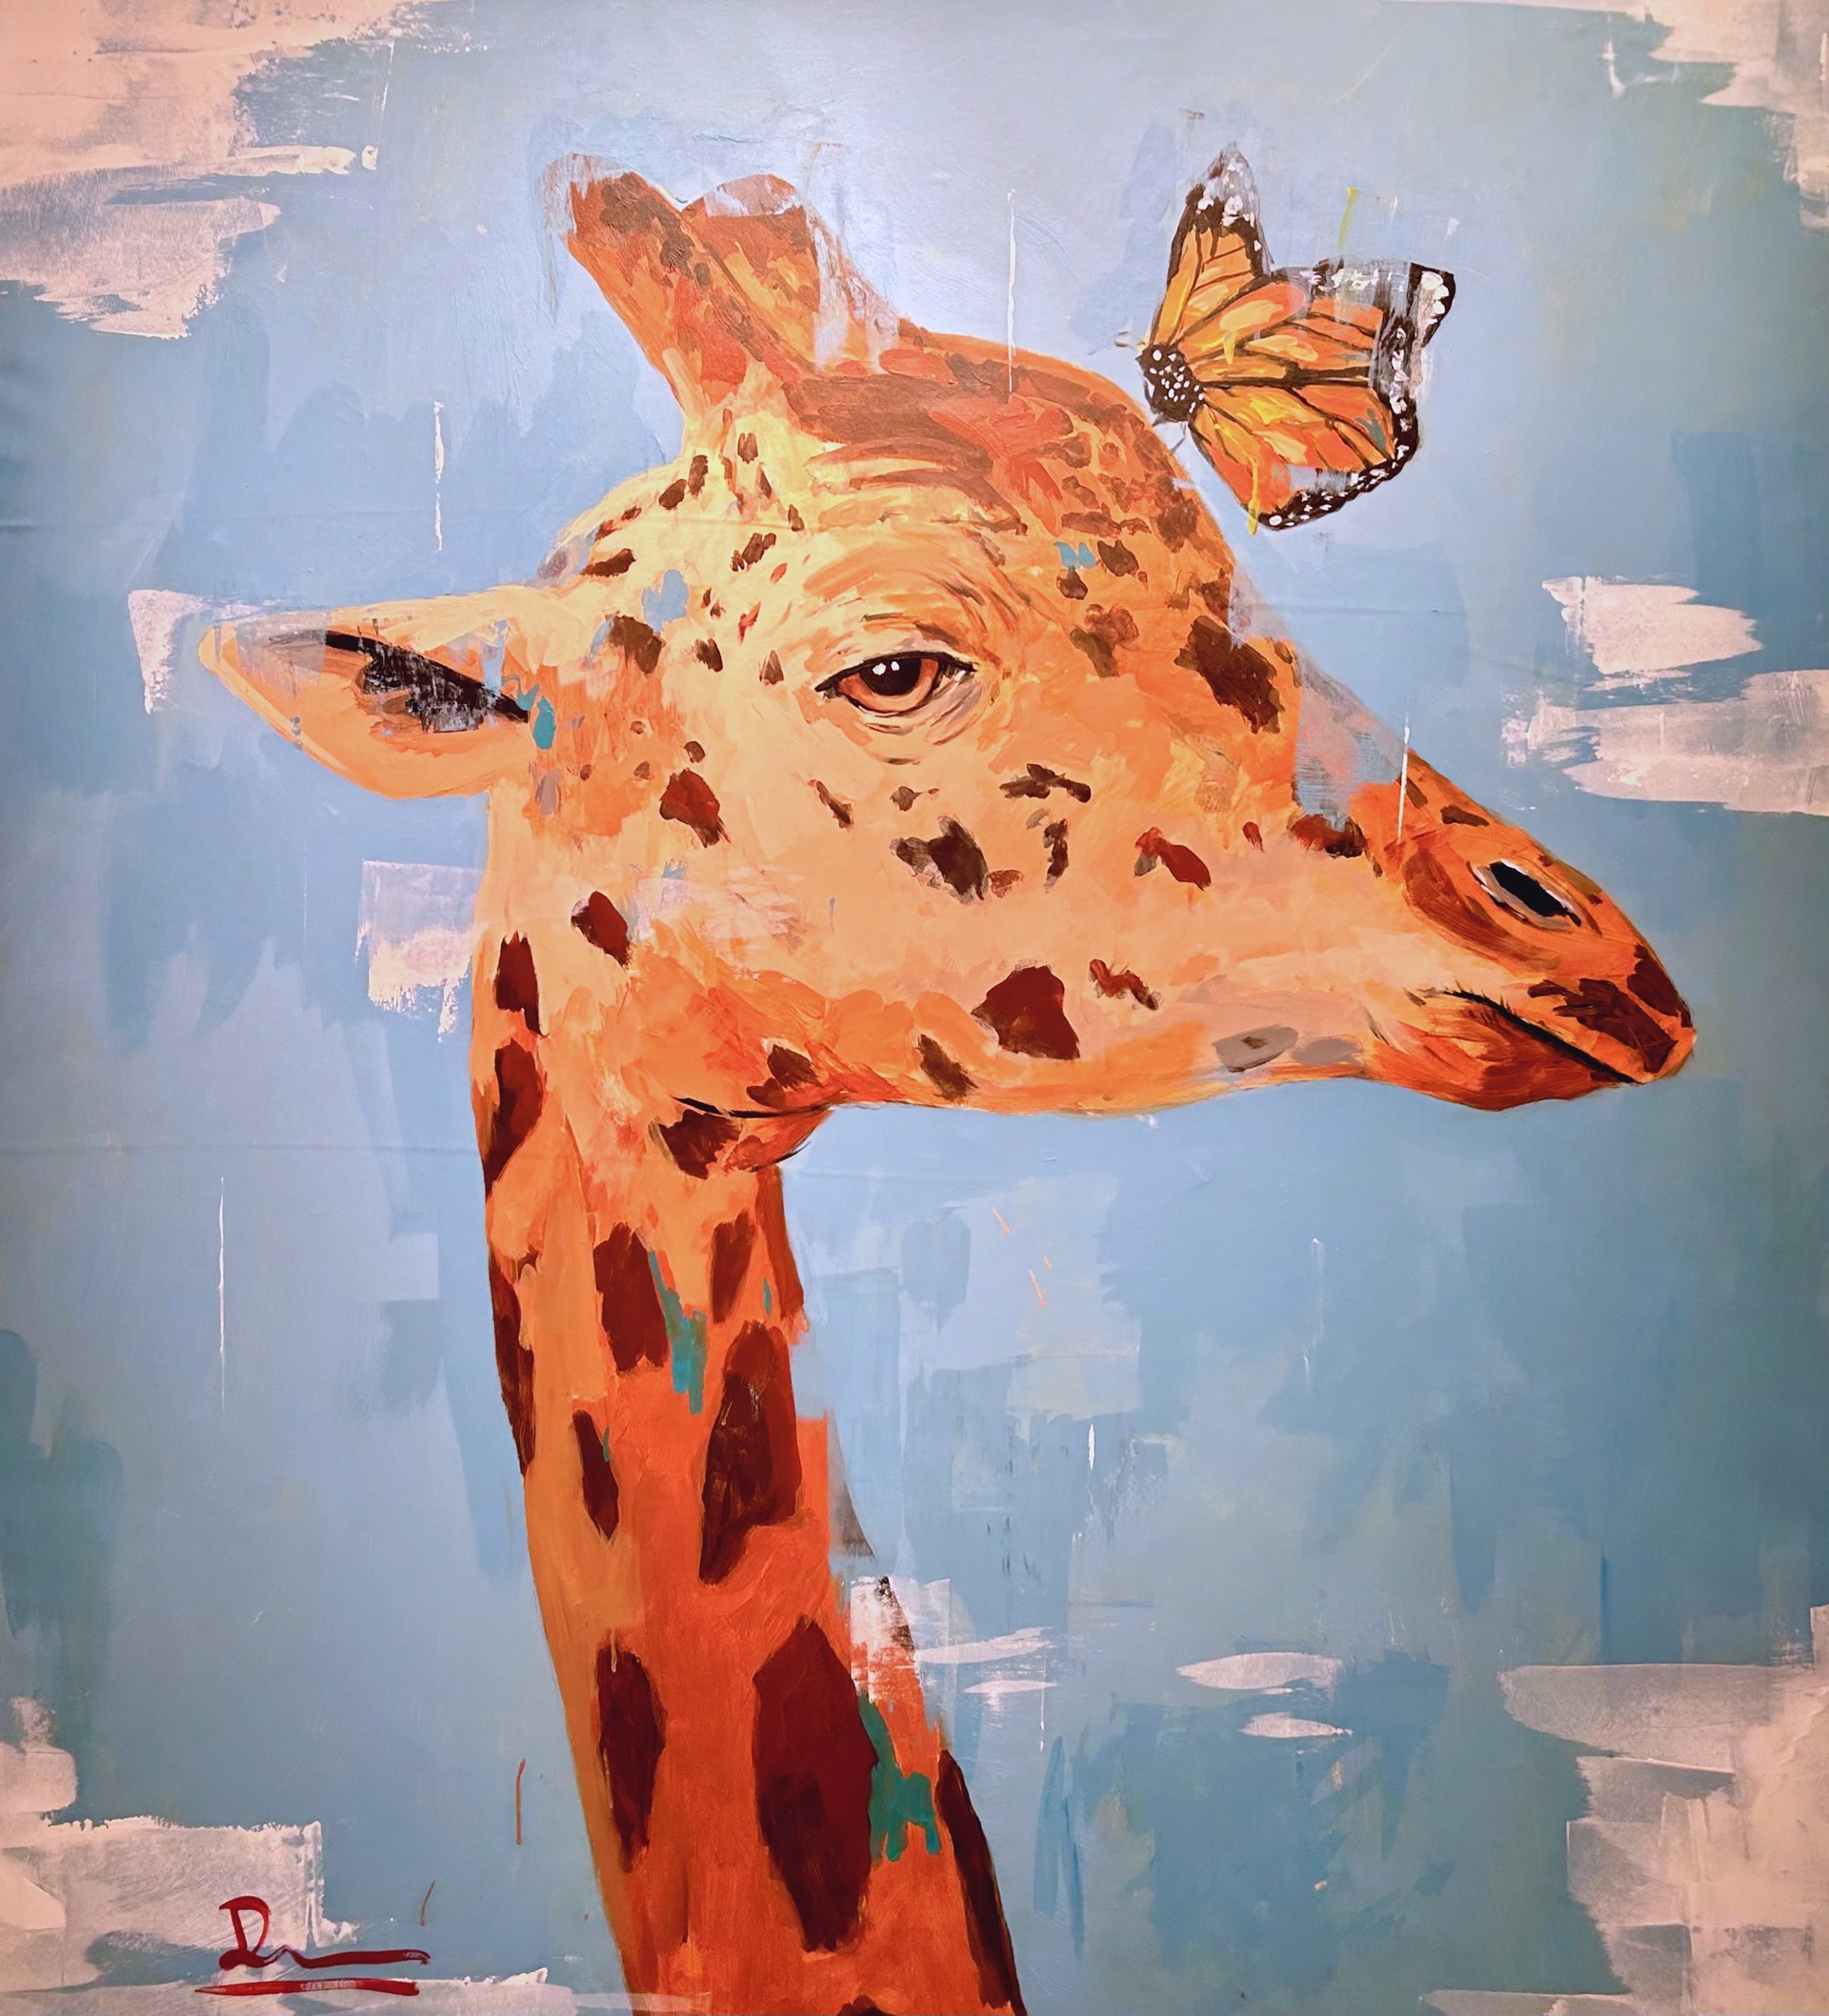 Giraffe and the Butterfly by Dominic Mattioli